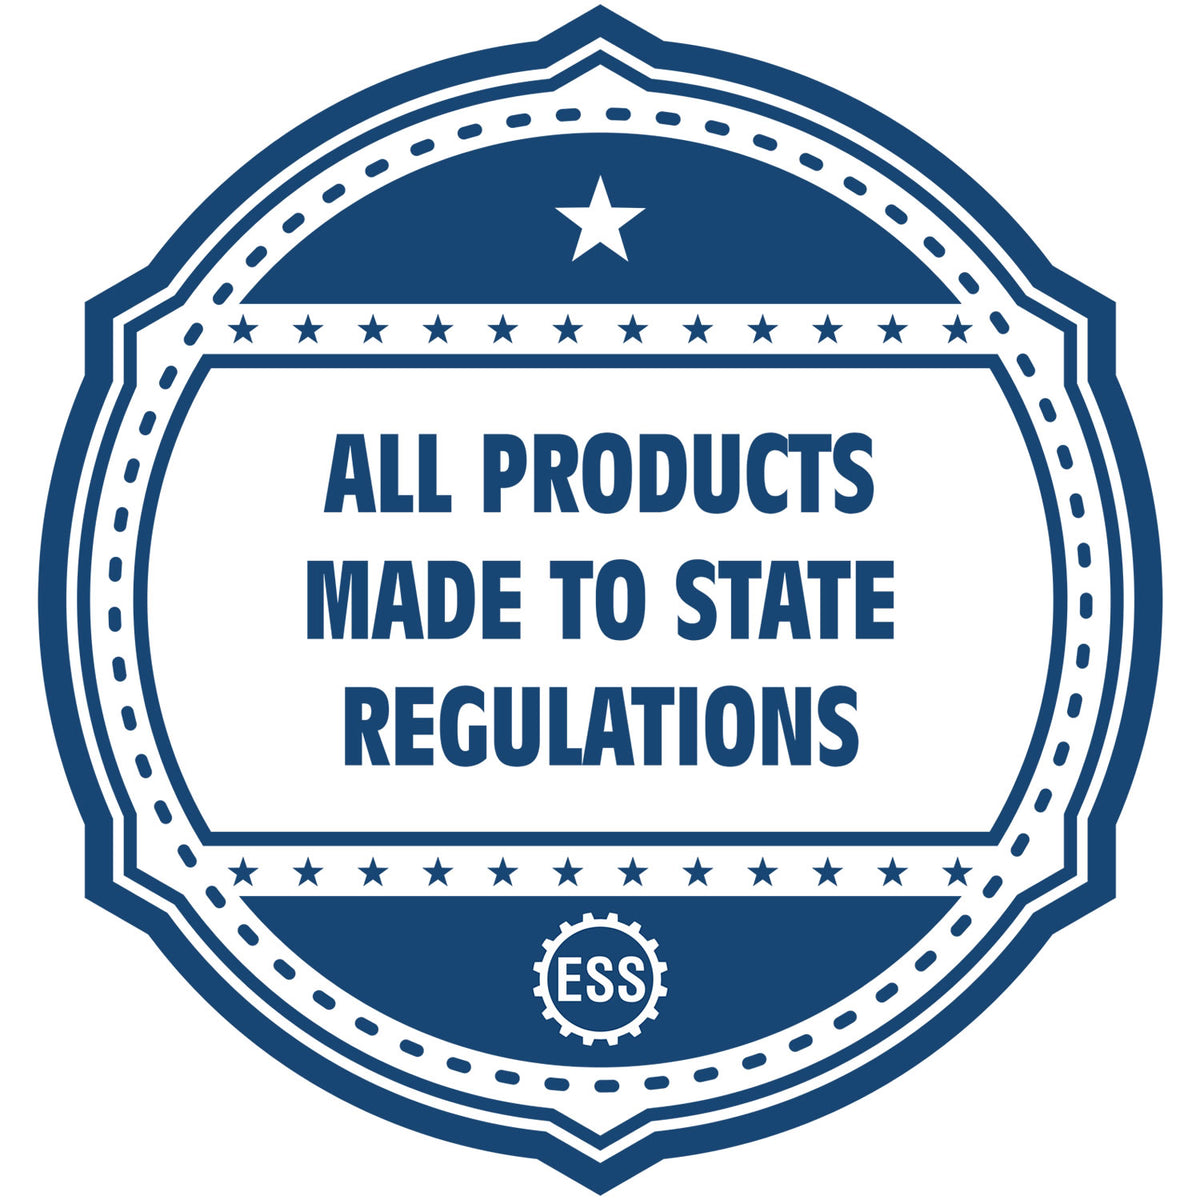 A blue icon or badge for the Gift Kentucky Geologist Seal showing that this product is made in compliance with state regulations.